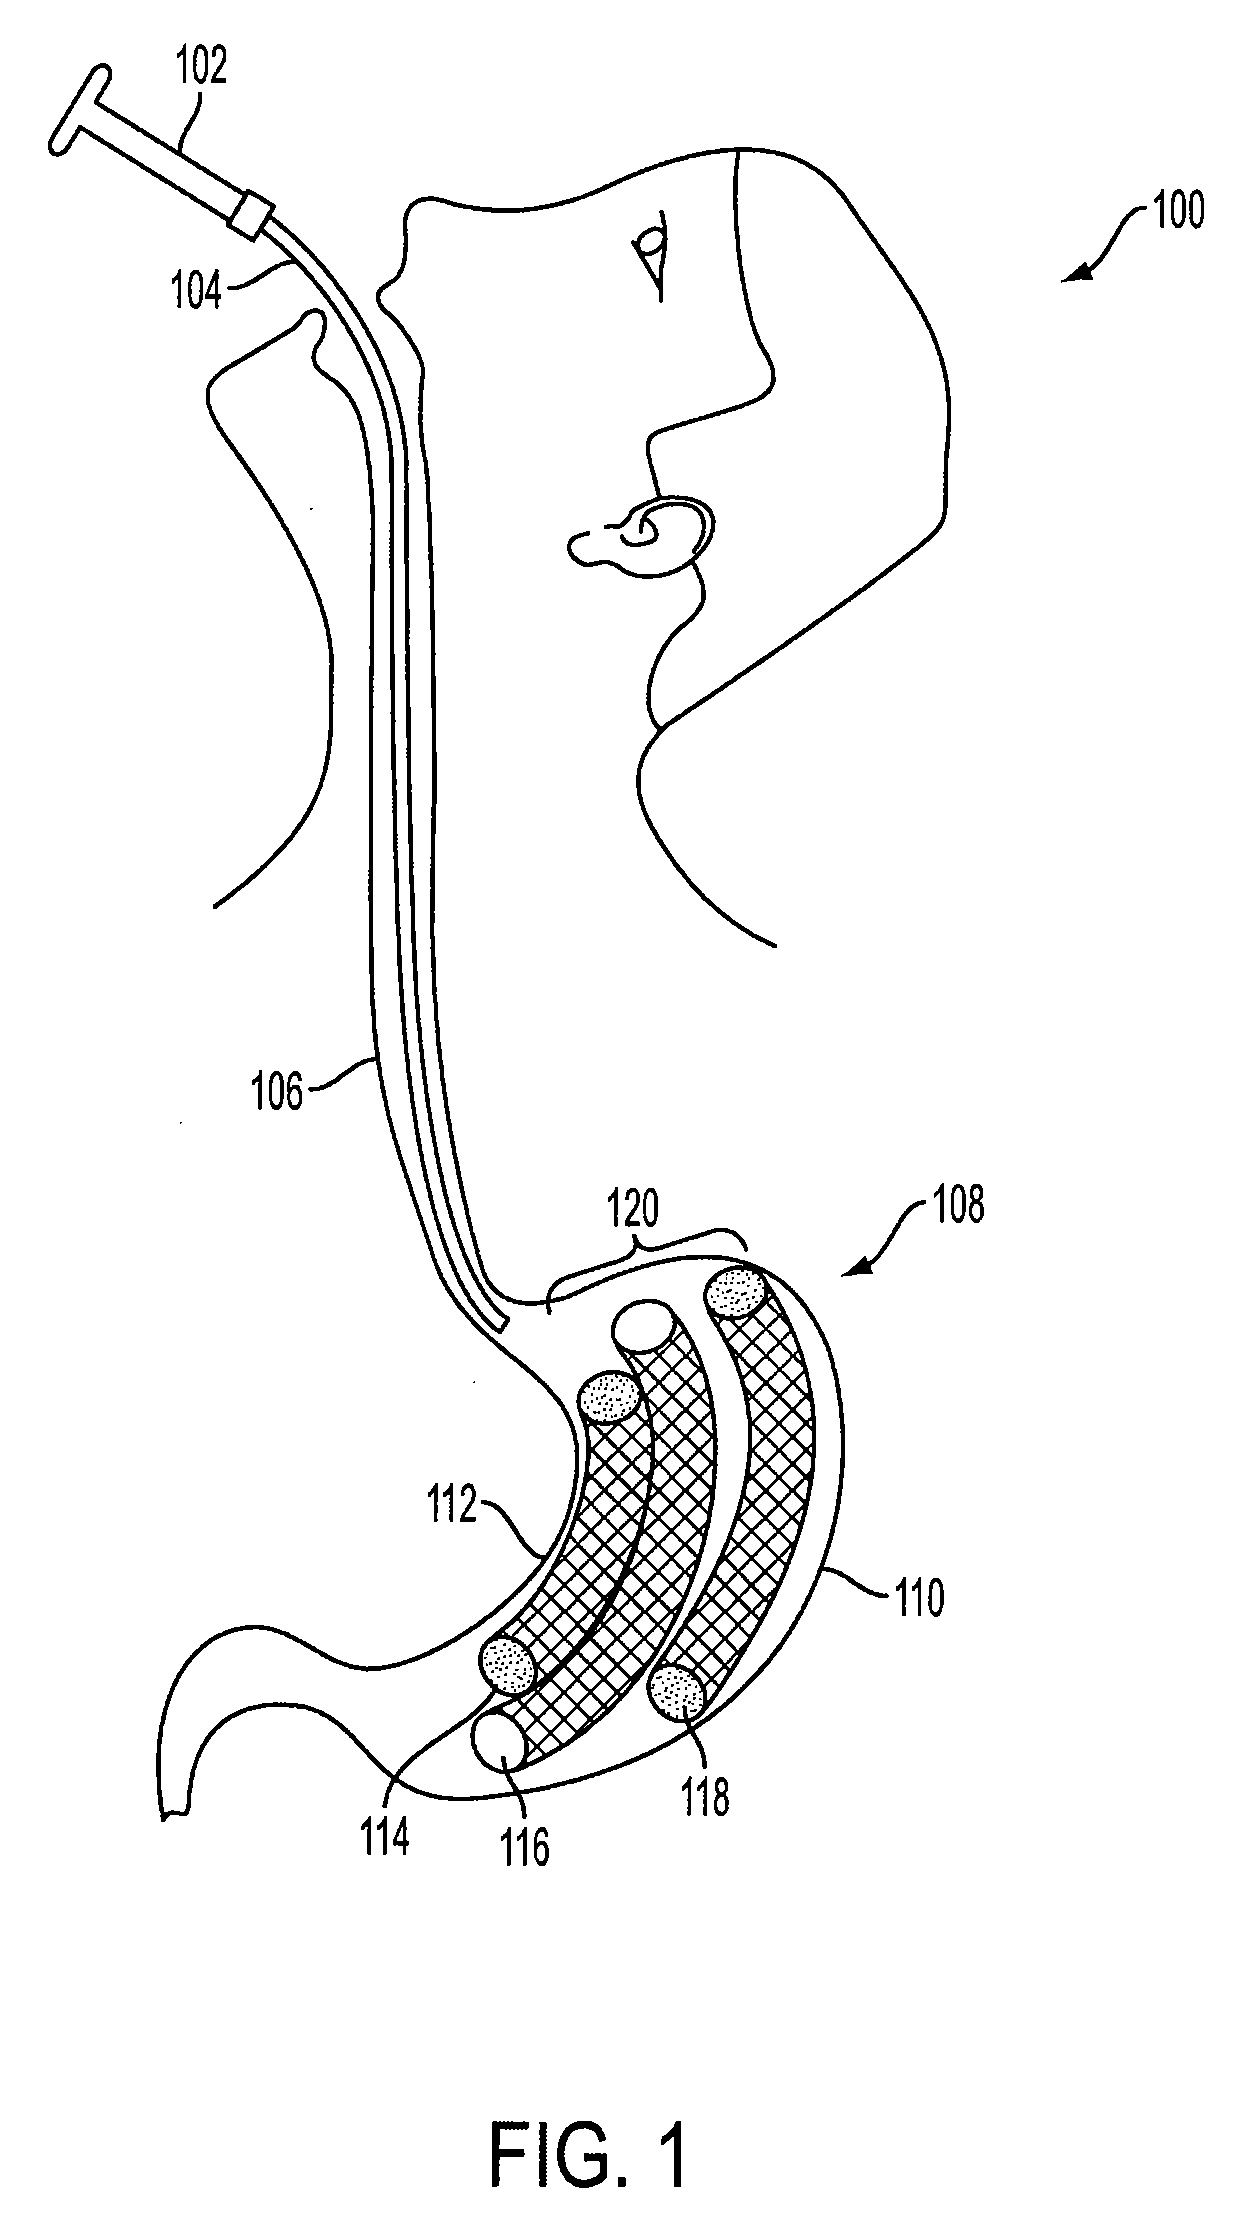 Method and apparatus for treating obesity and controlling weight gain using self-expanding intragastric devices